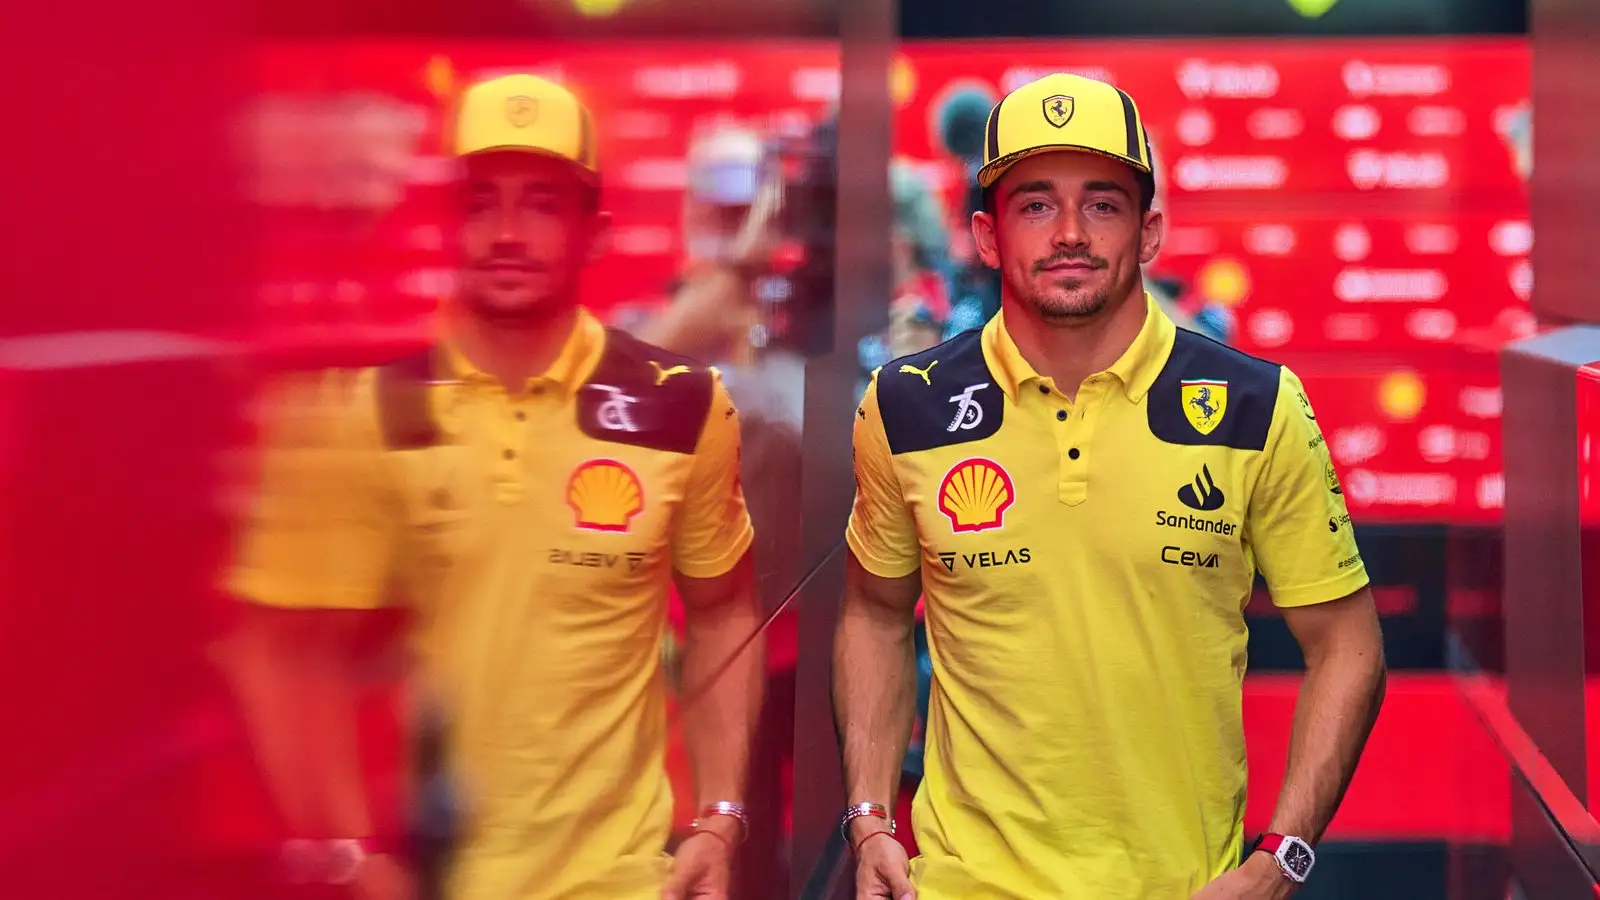 Charles Leclerc next to his reflection. Monza, September 2022.